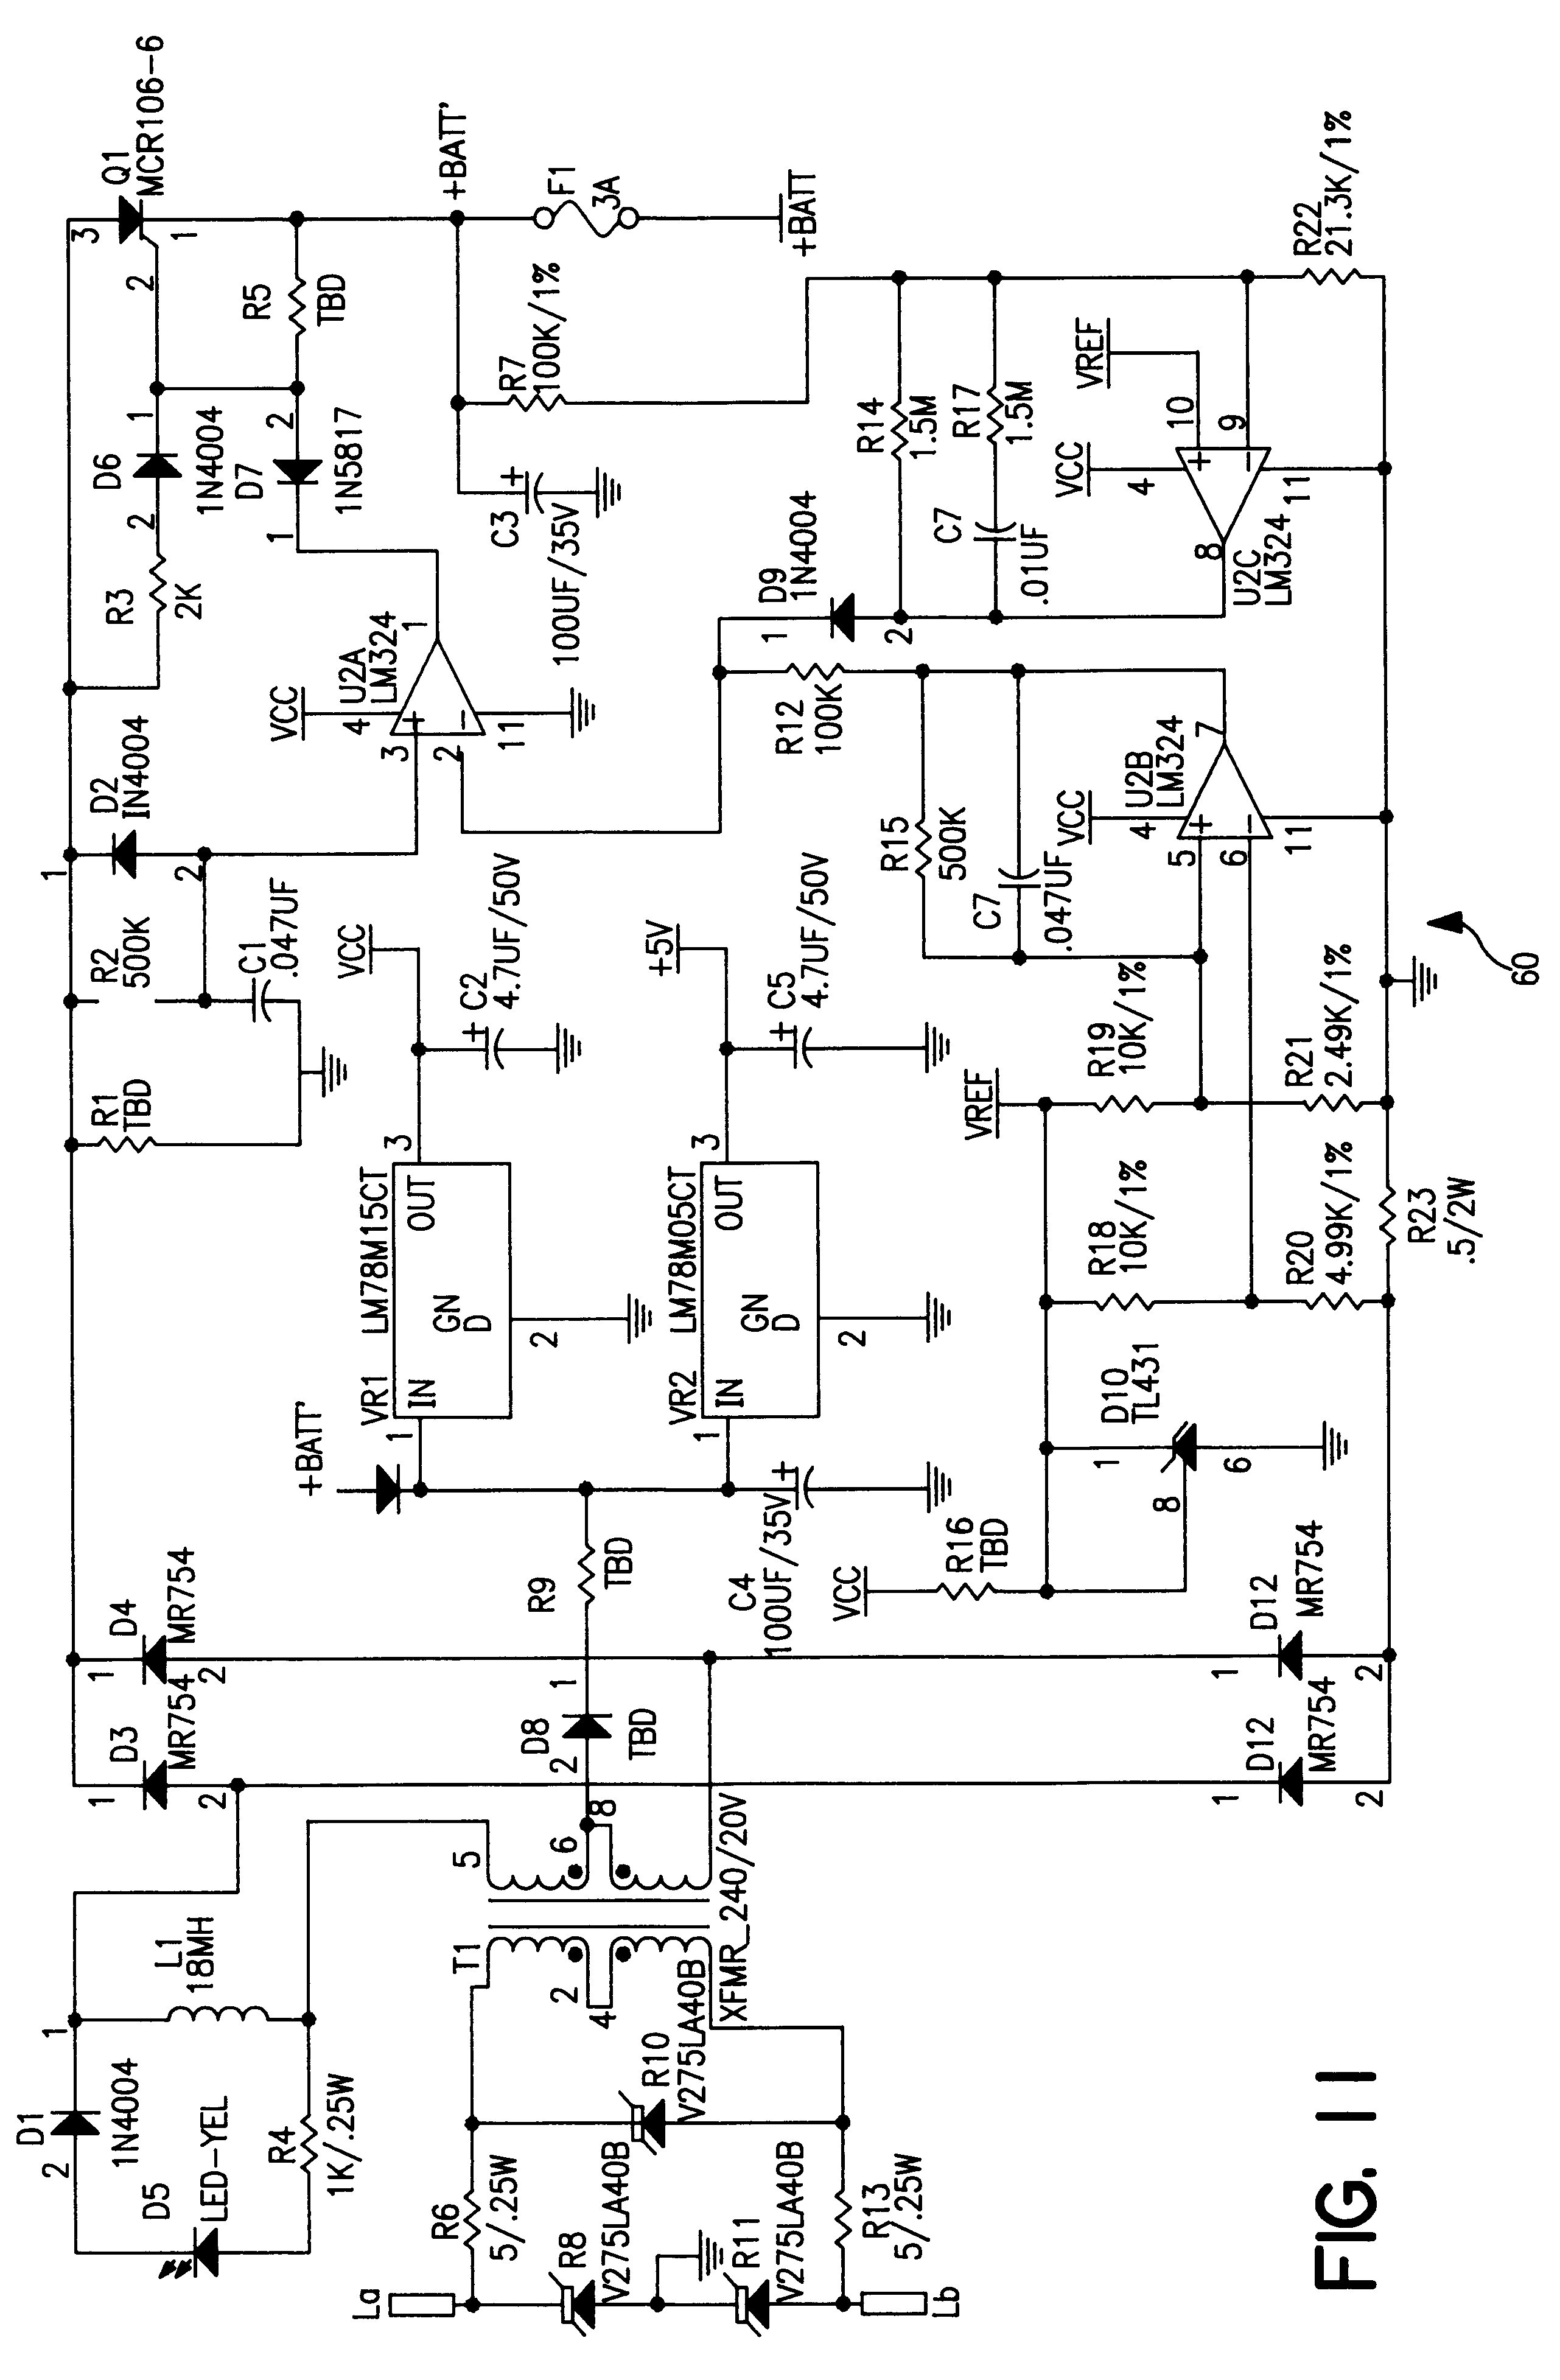 Reliance Transfer Switch Wiring Diagram Free Downloads Wiring Diagram for A Home Generator Transfer Switch Of Reliance Transfer Switch Wiring Diagram